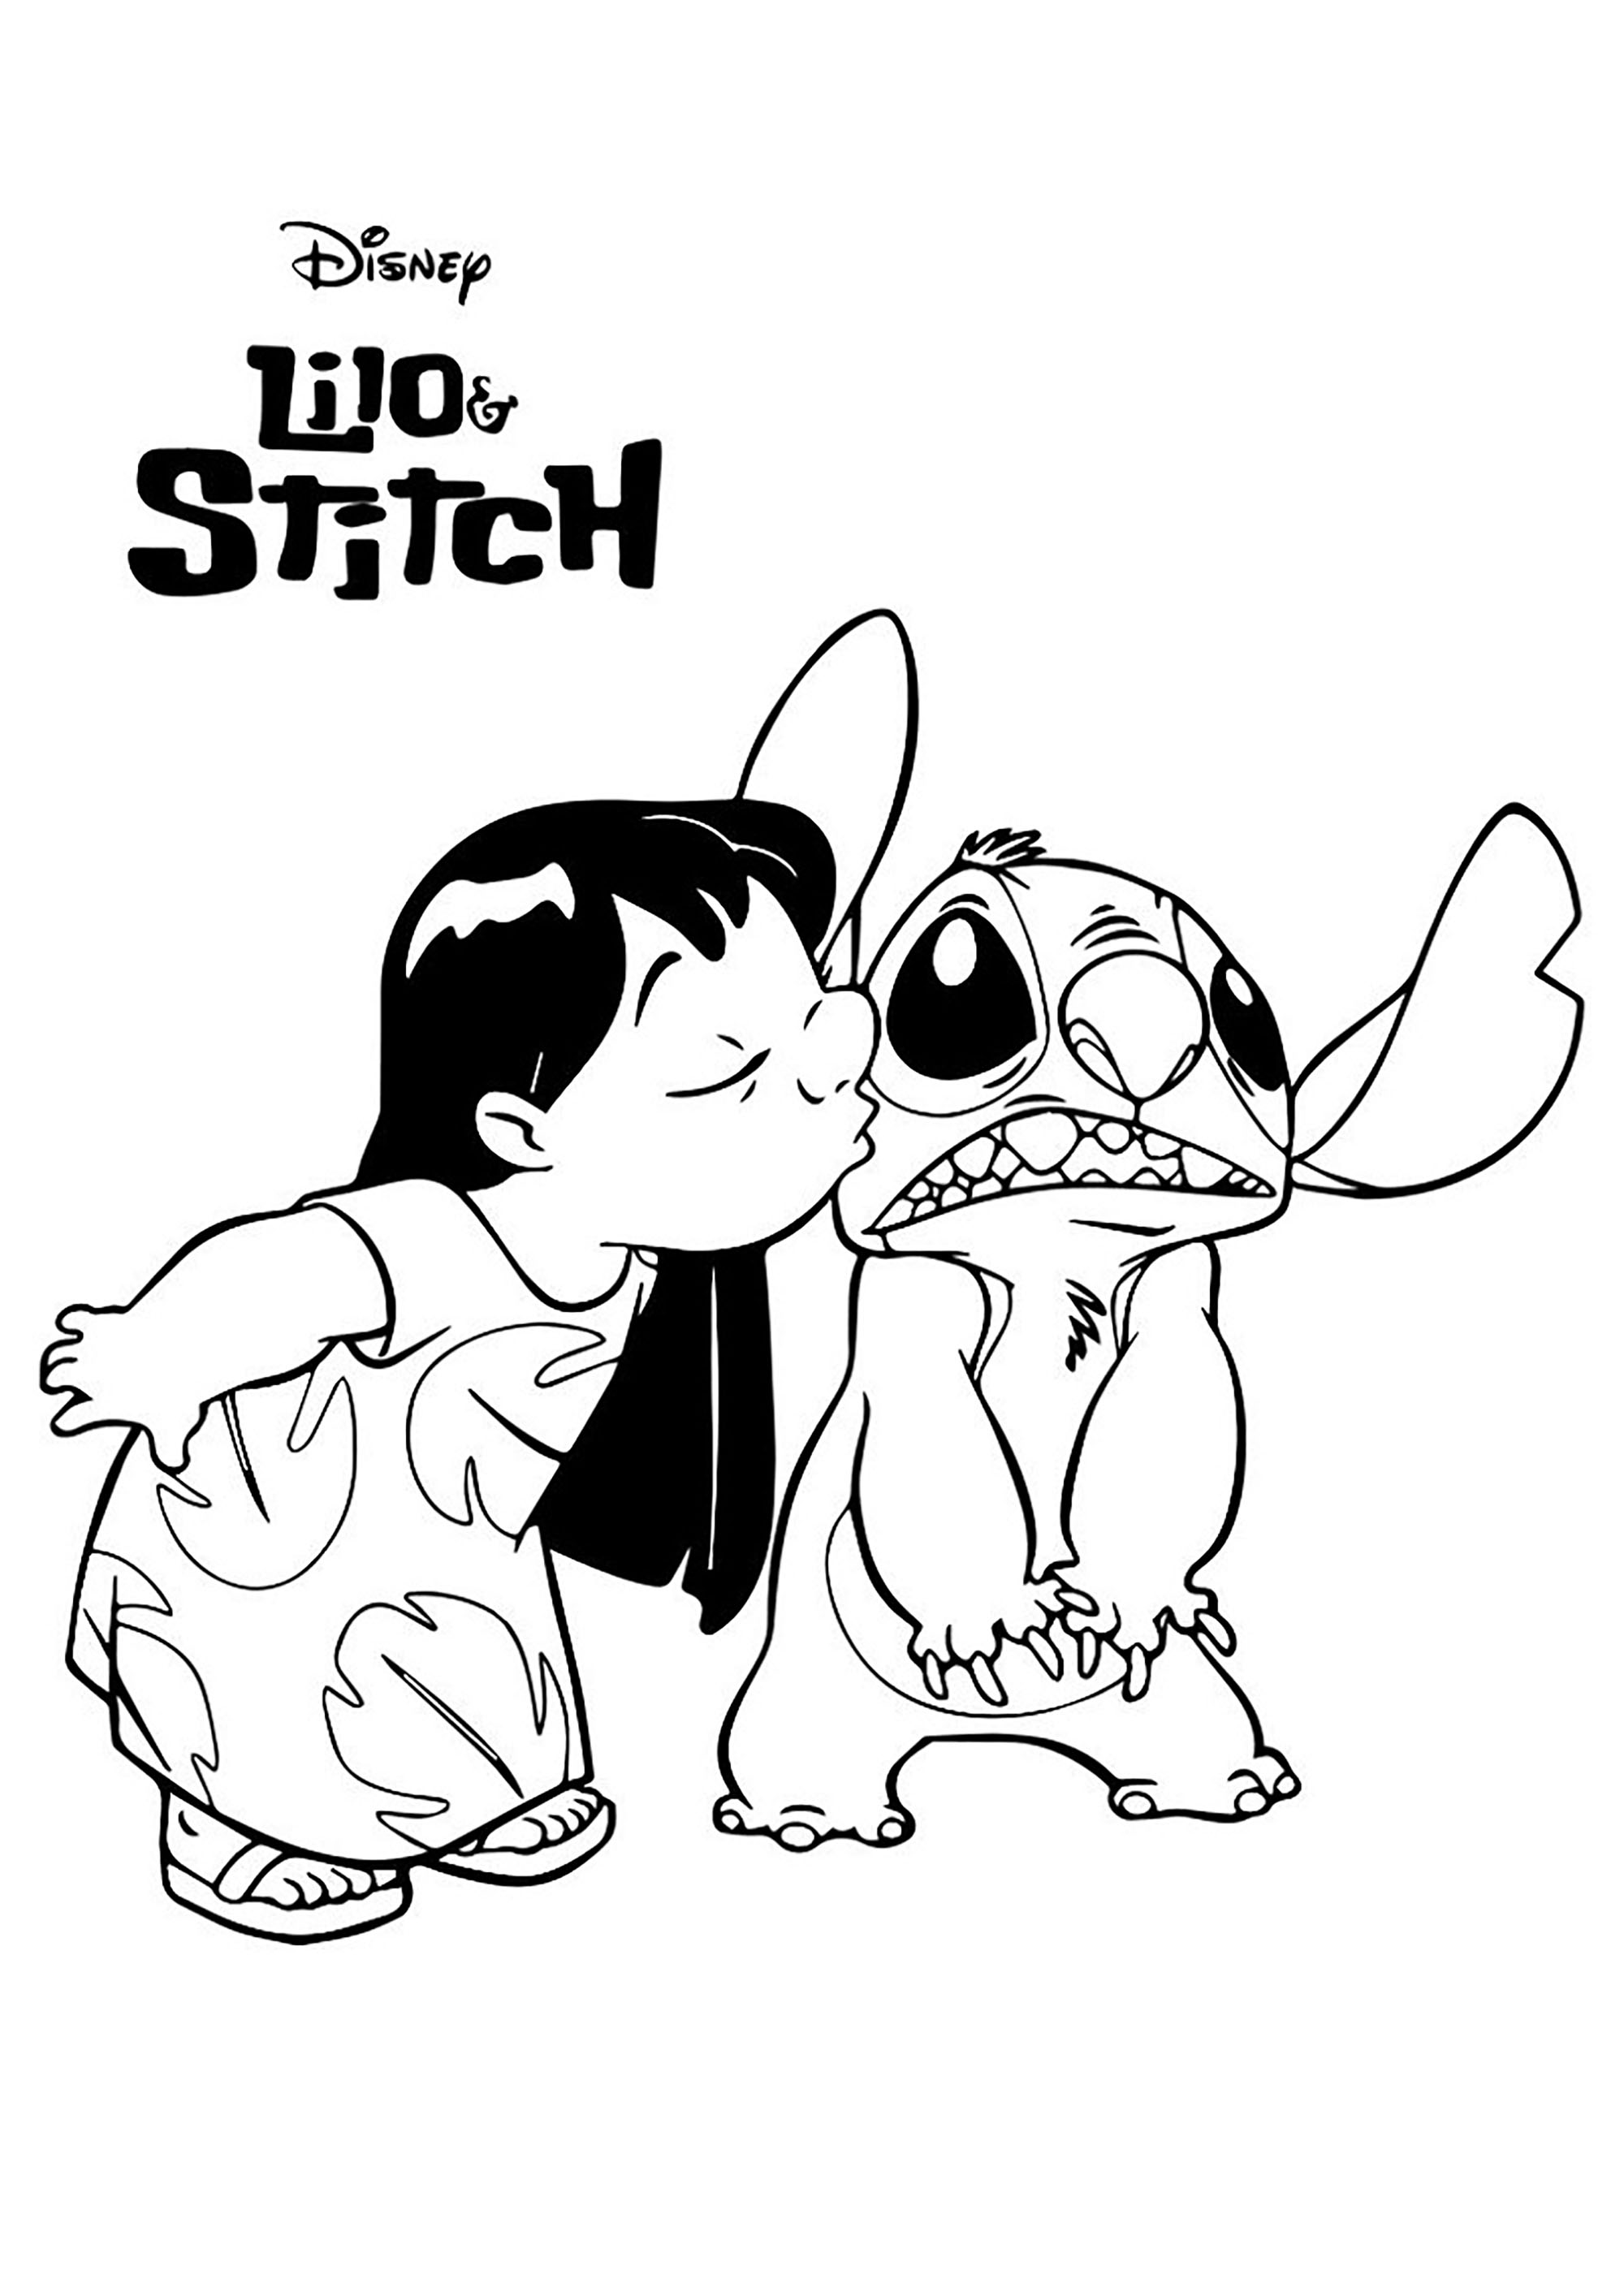 Lilo and Stitch coloring pages to download - Lilo and Stitch Kids Coloring  Pages